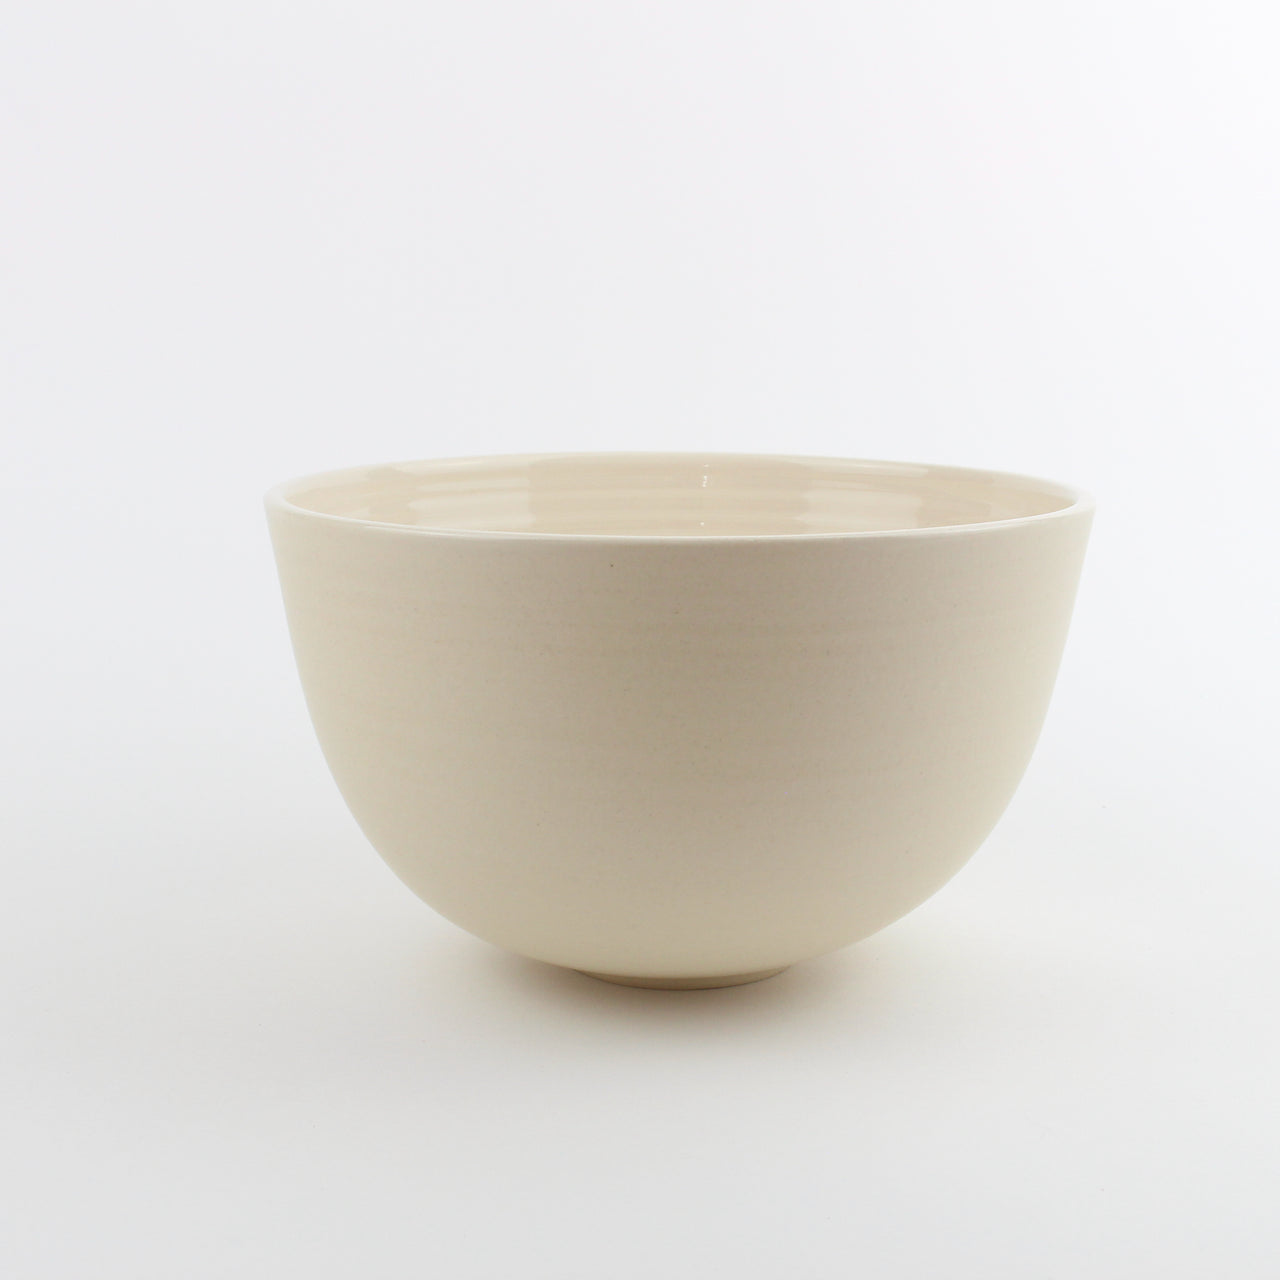 Lucy Burley - Ivory deep bowl